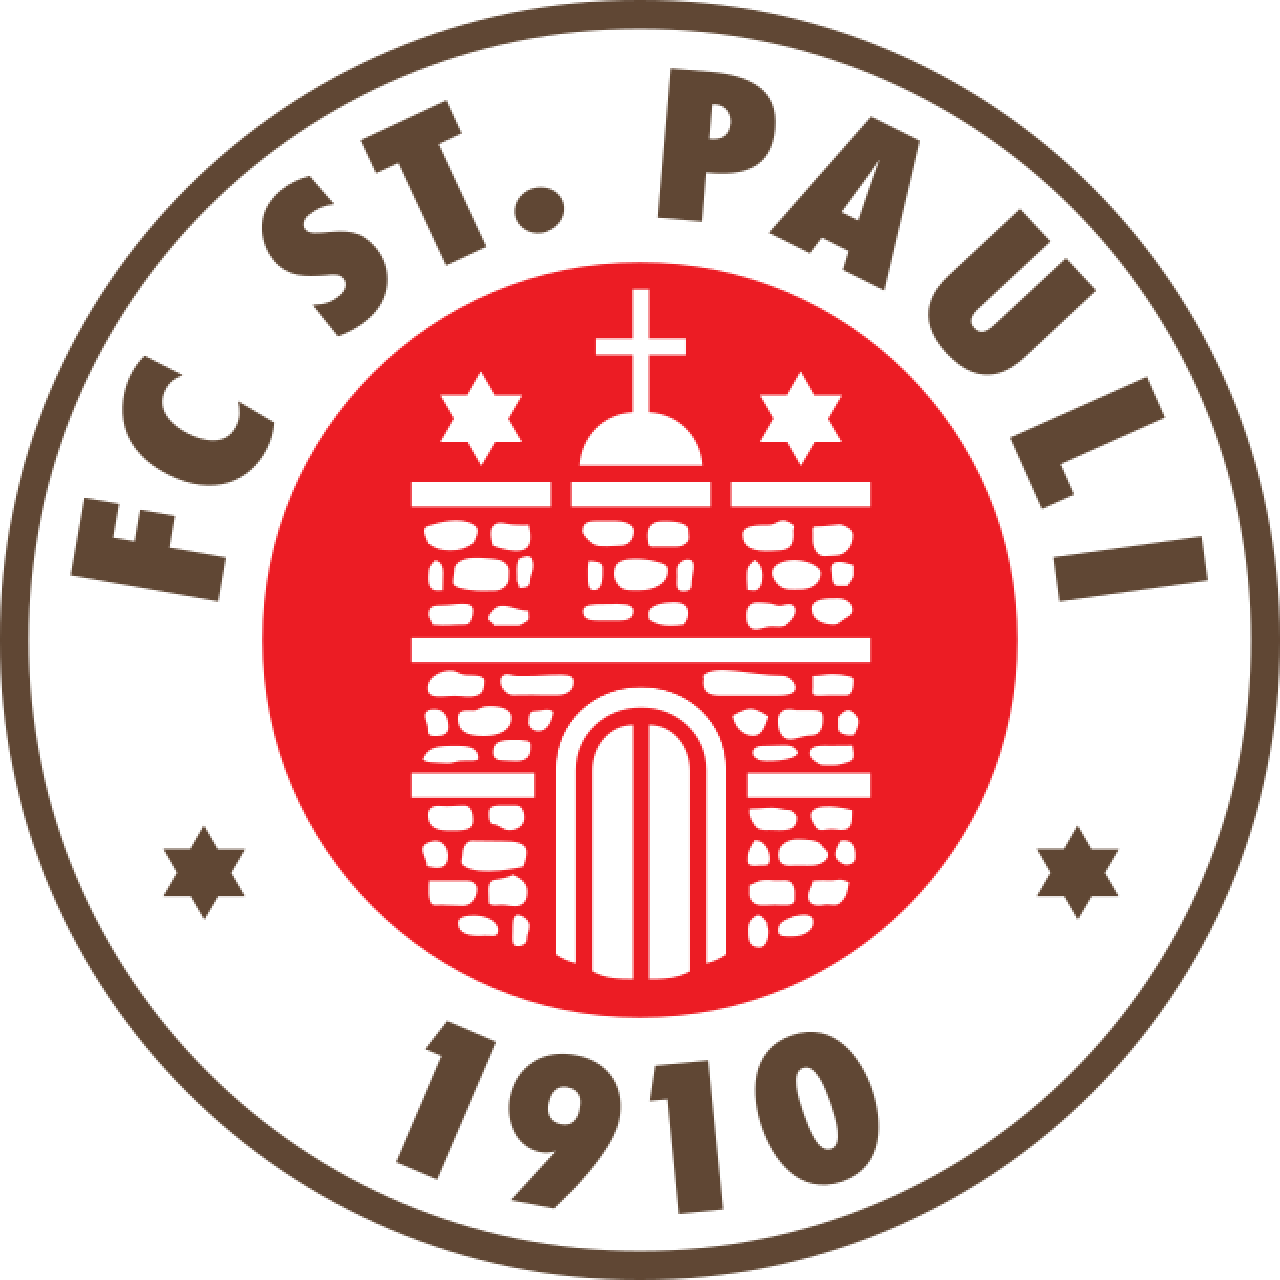 Reports: St. Pauli preparing to sign Hürzeler's replacement